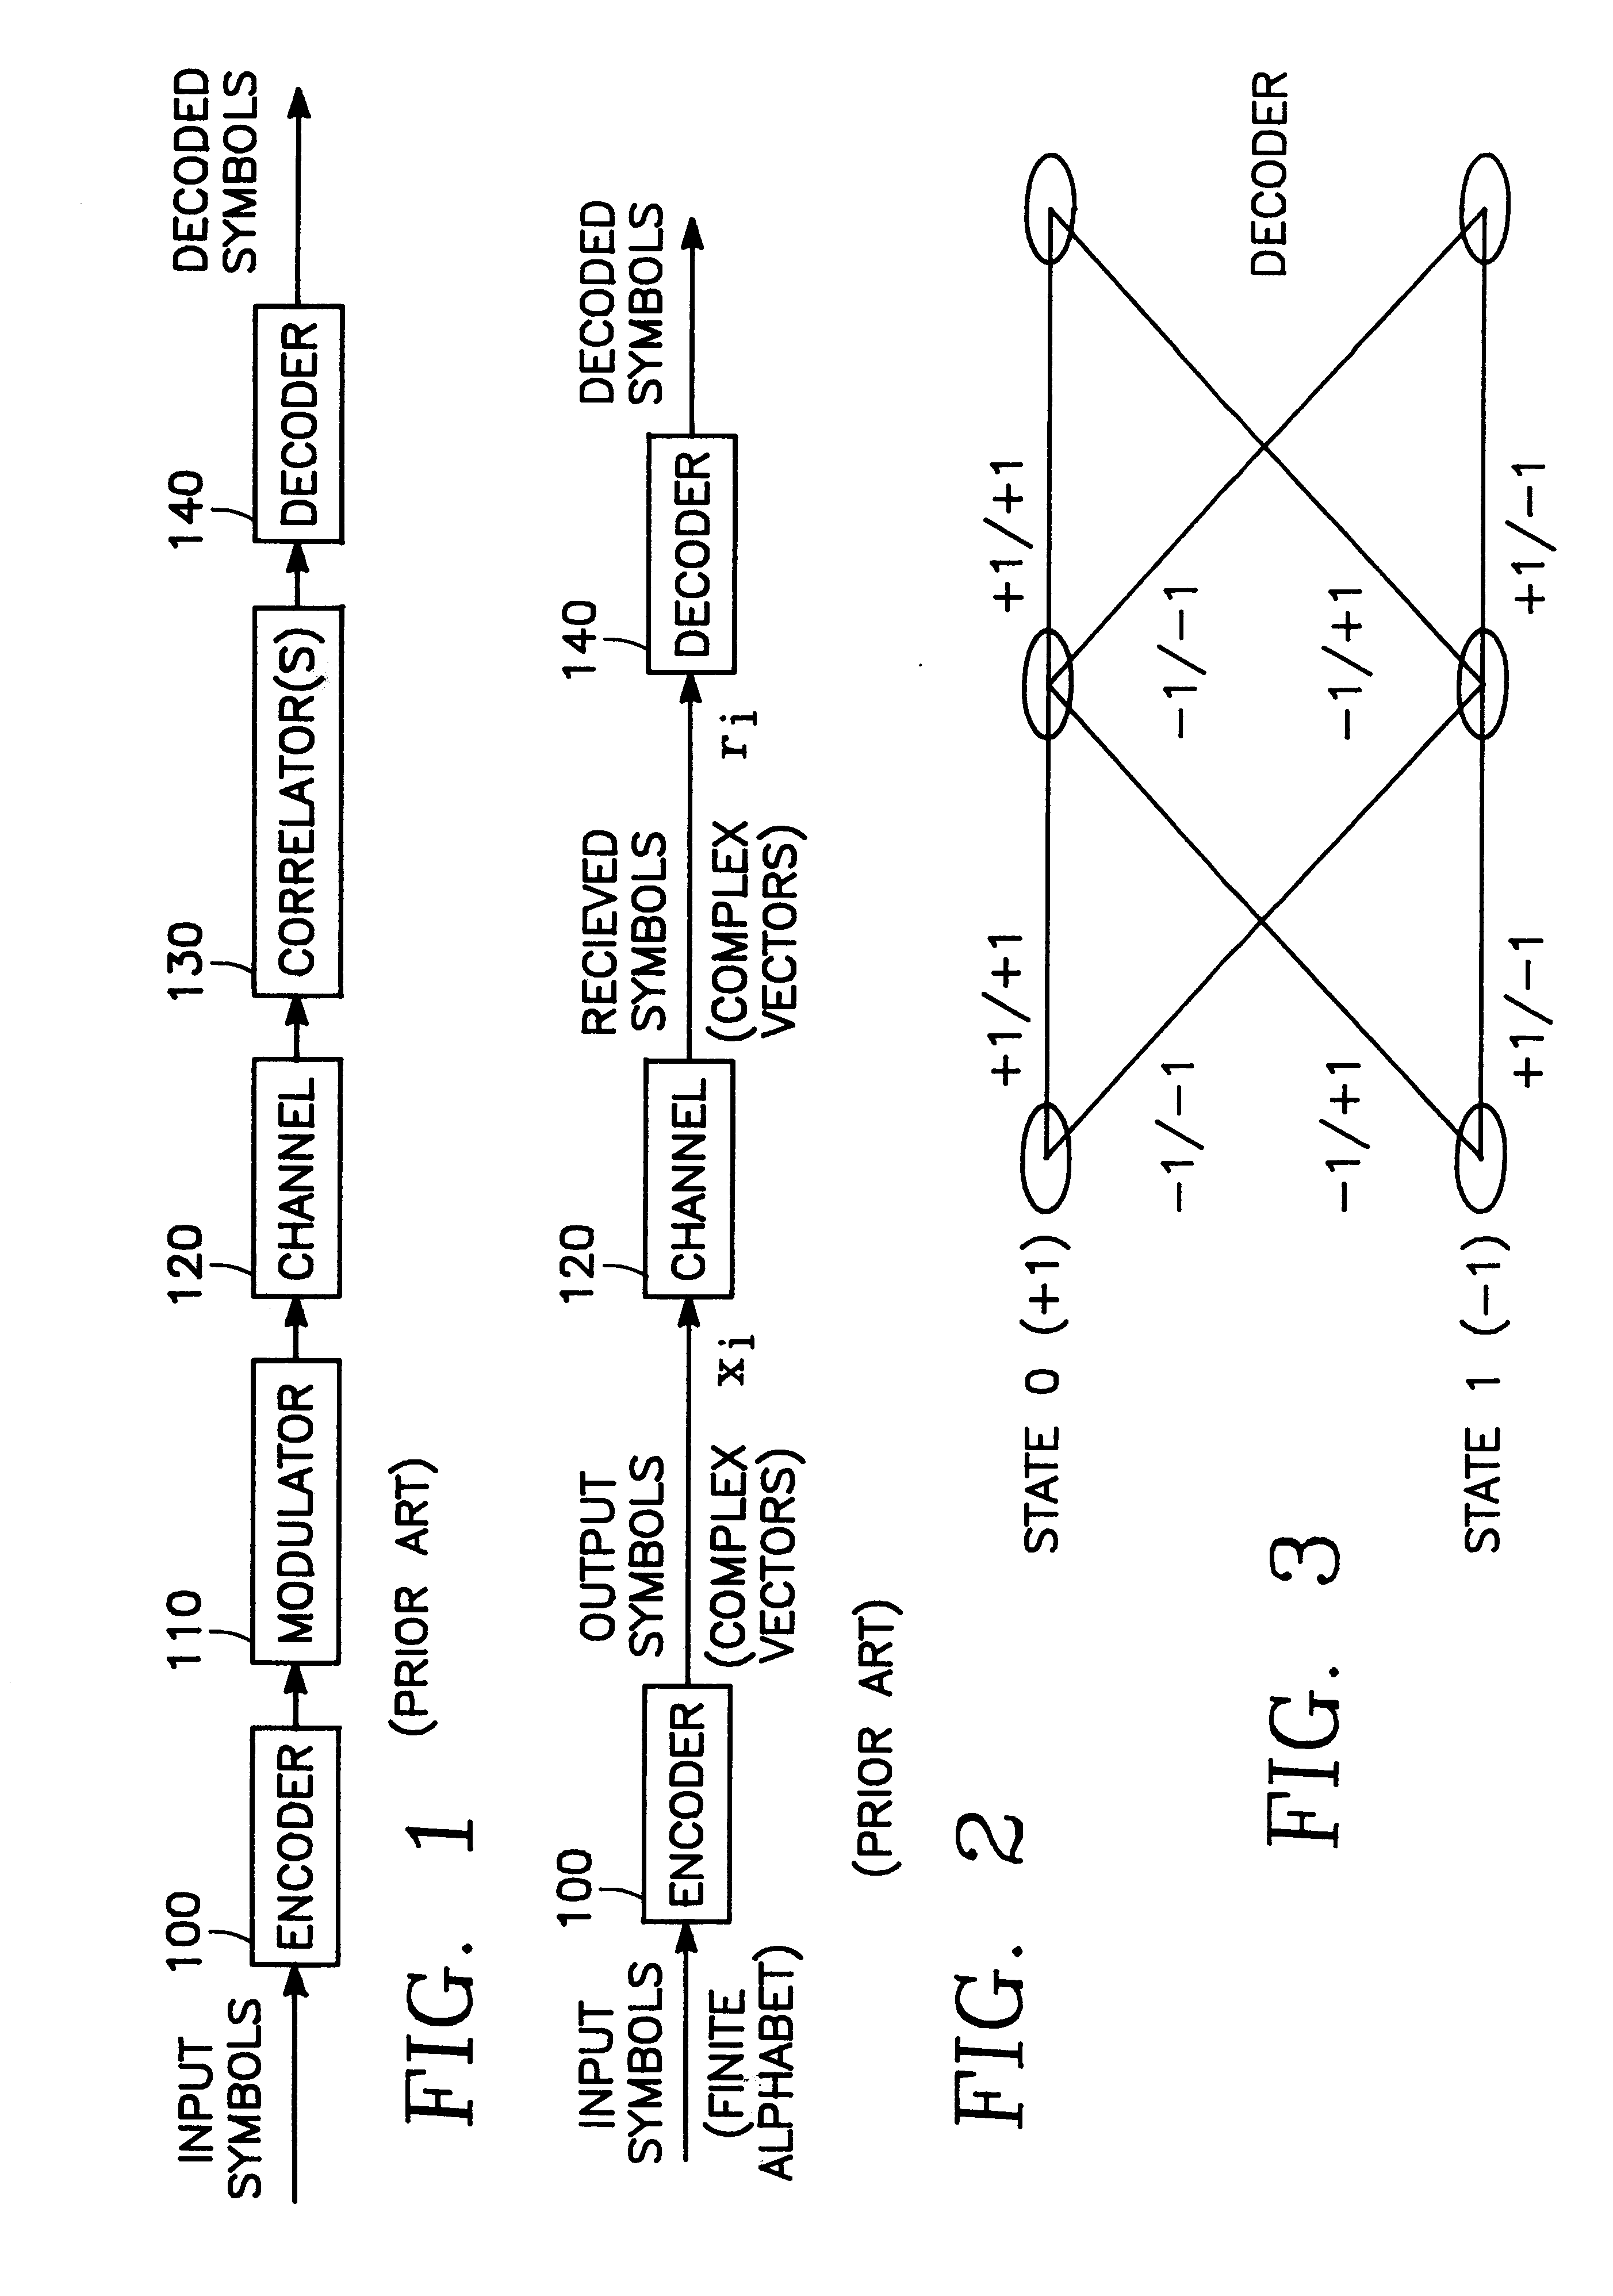 Method for noncoherent coded modulation